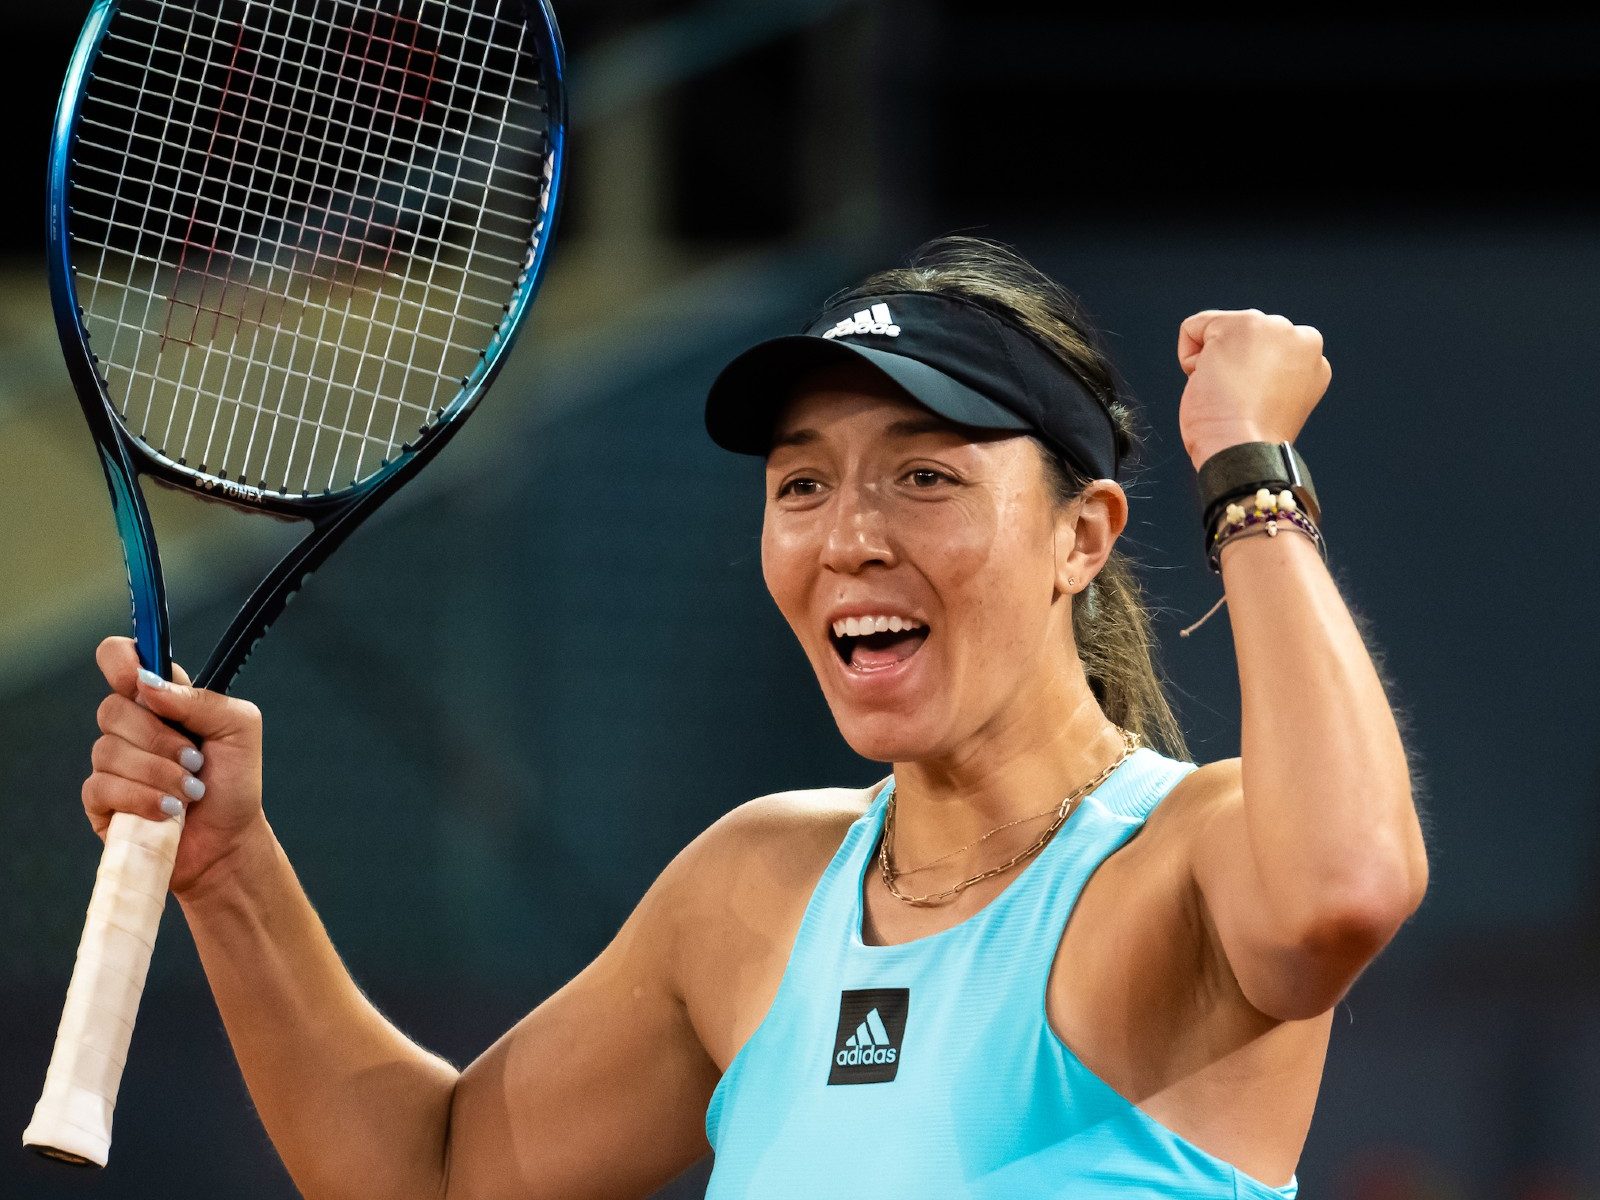 Jessica Pegula, The Tennis Star Richer Than Roger Federer and Serena Williams